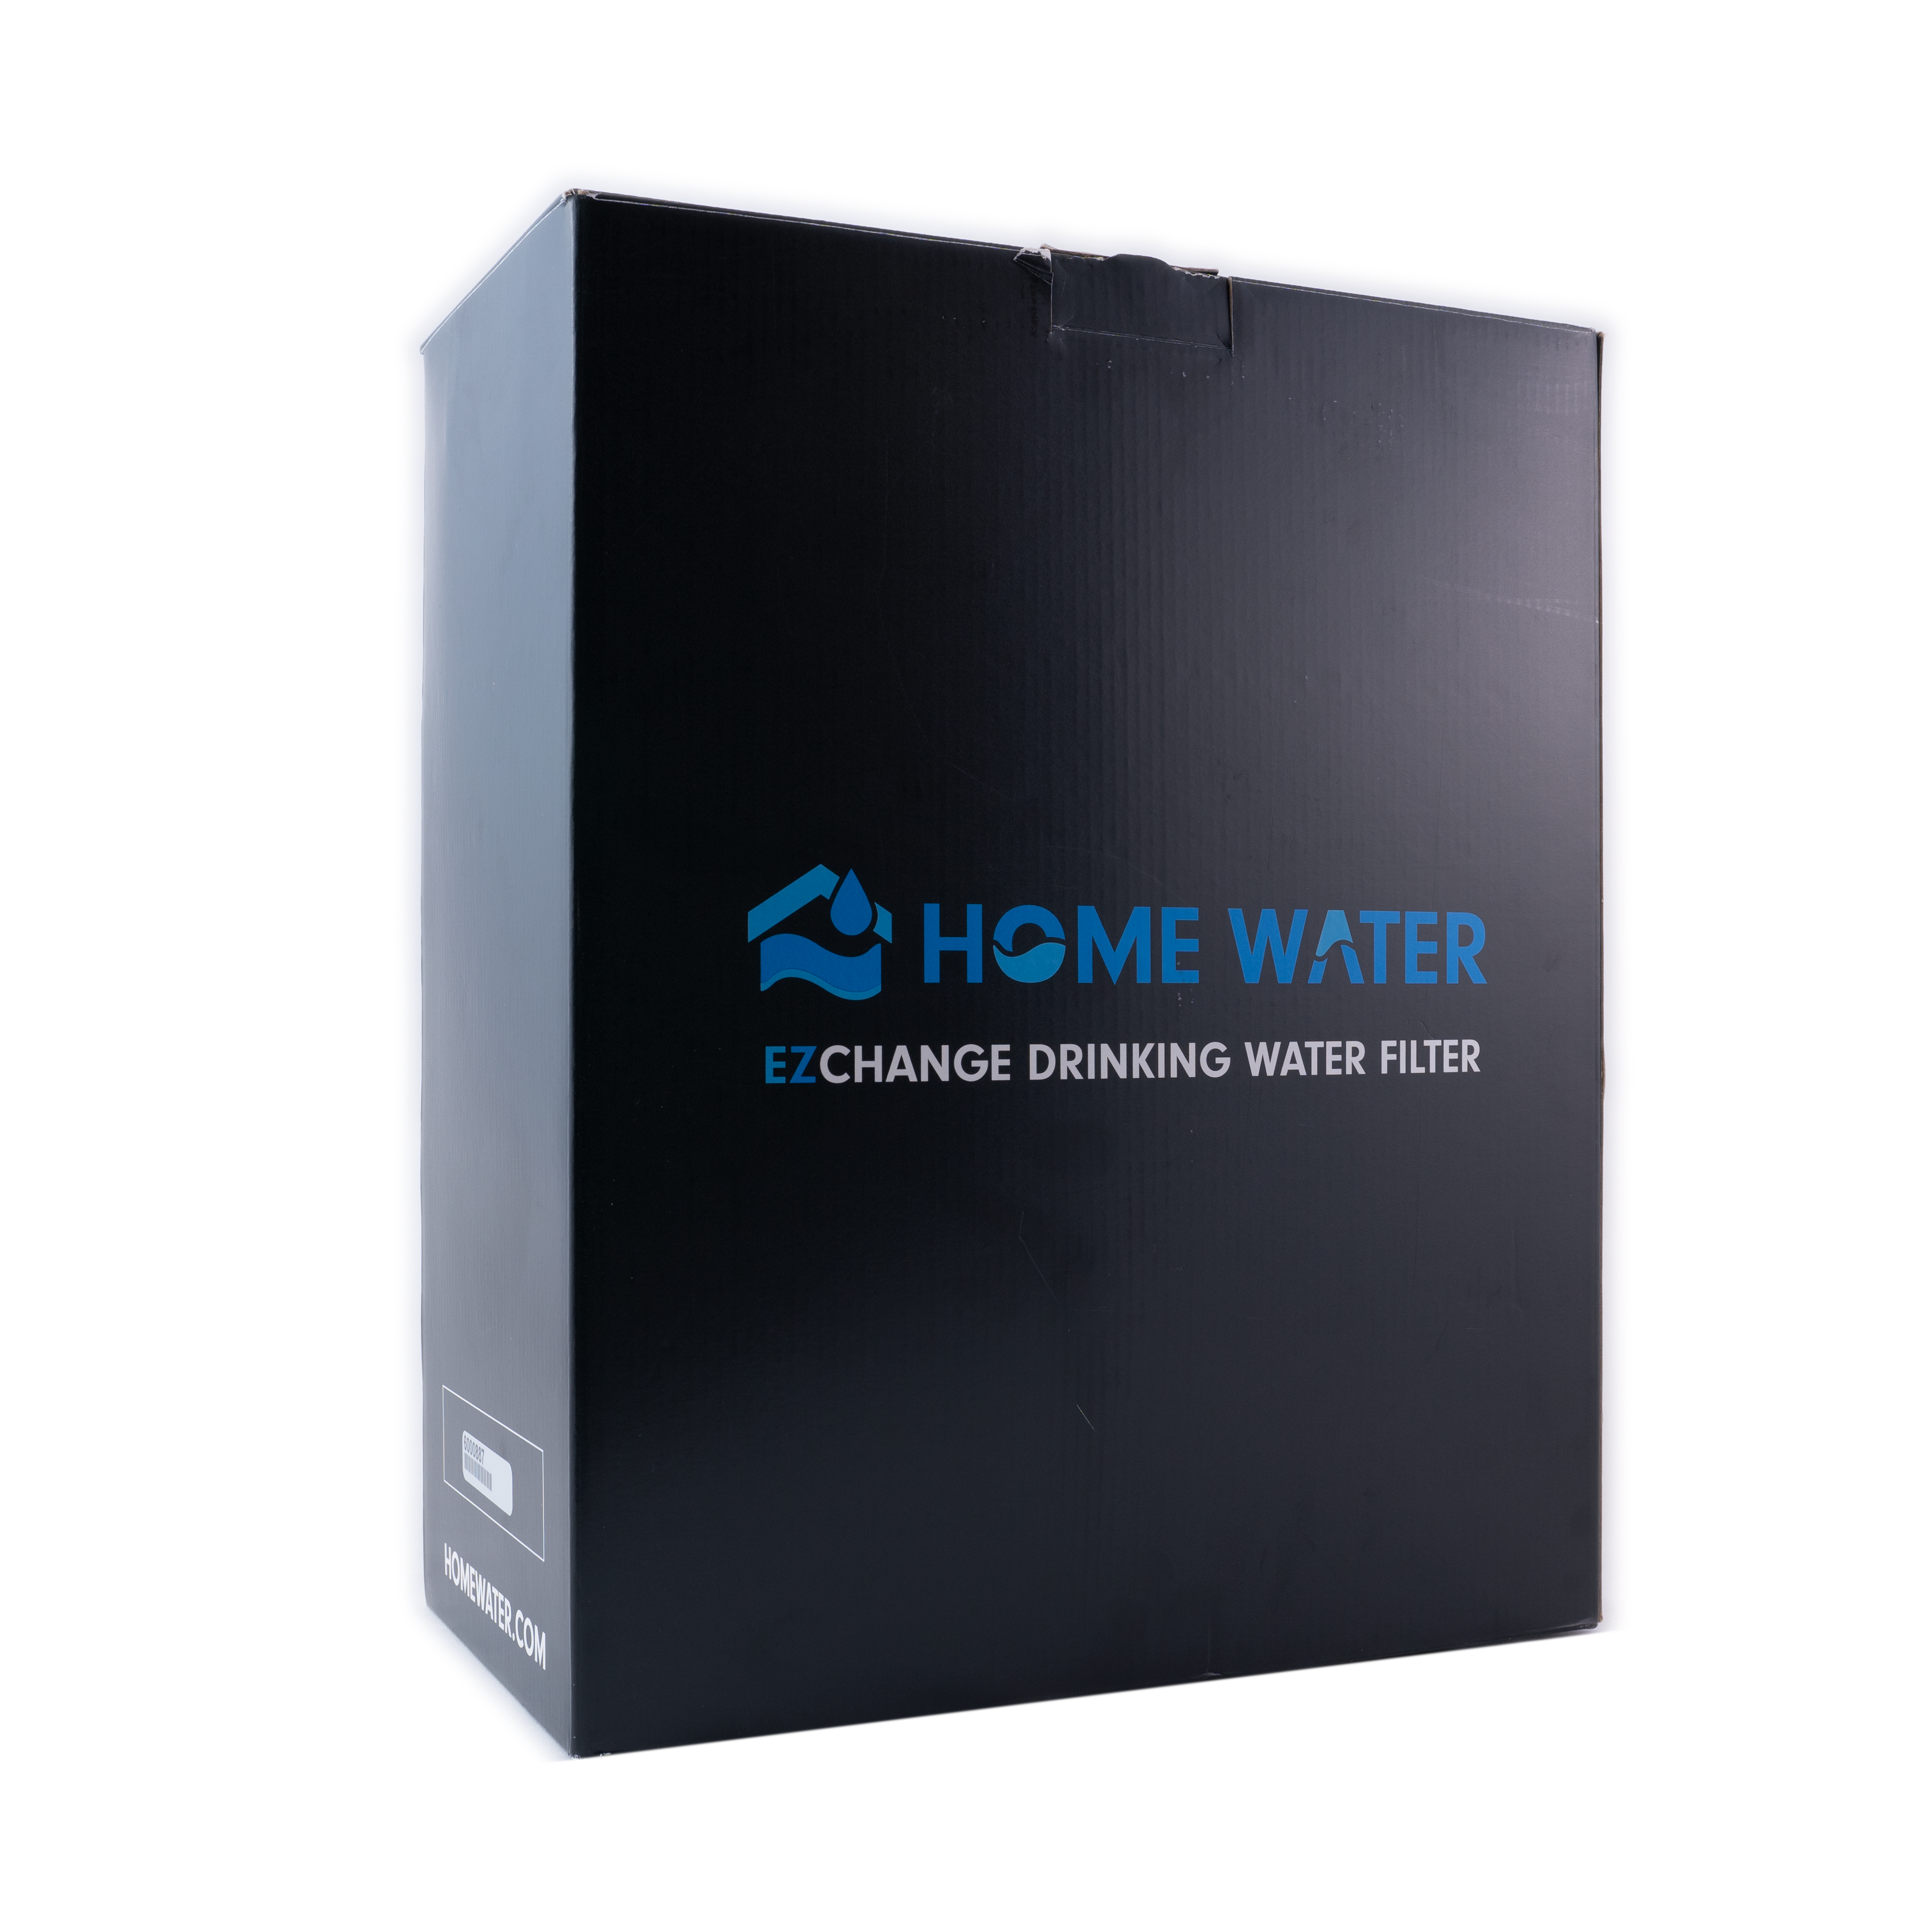 HomeWater Glass Bottle Pack (Set of 4)